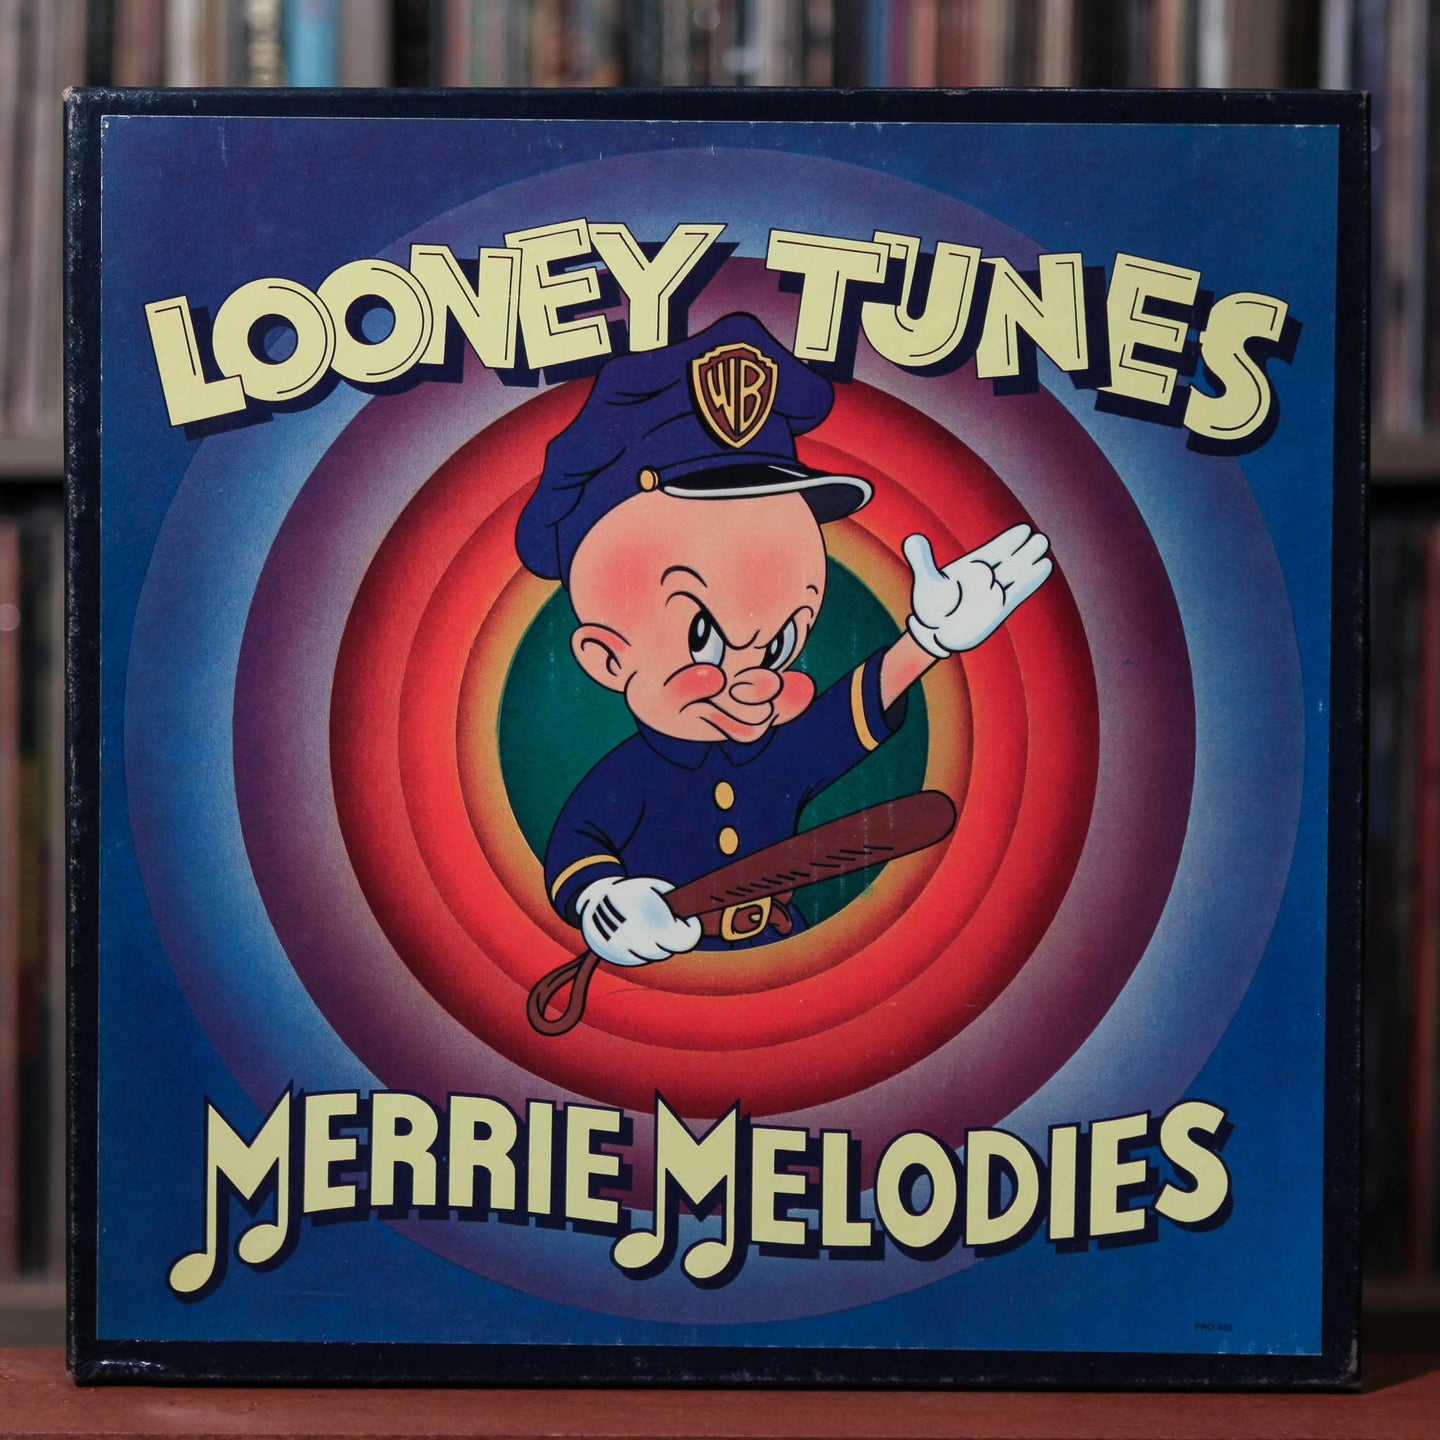 Looney Tunes - Merry Melodies Compilation - 3LP Boxset - 1970 WB, VG+/VG+